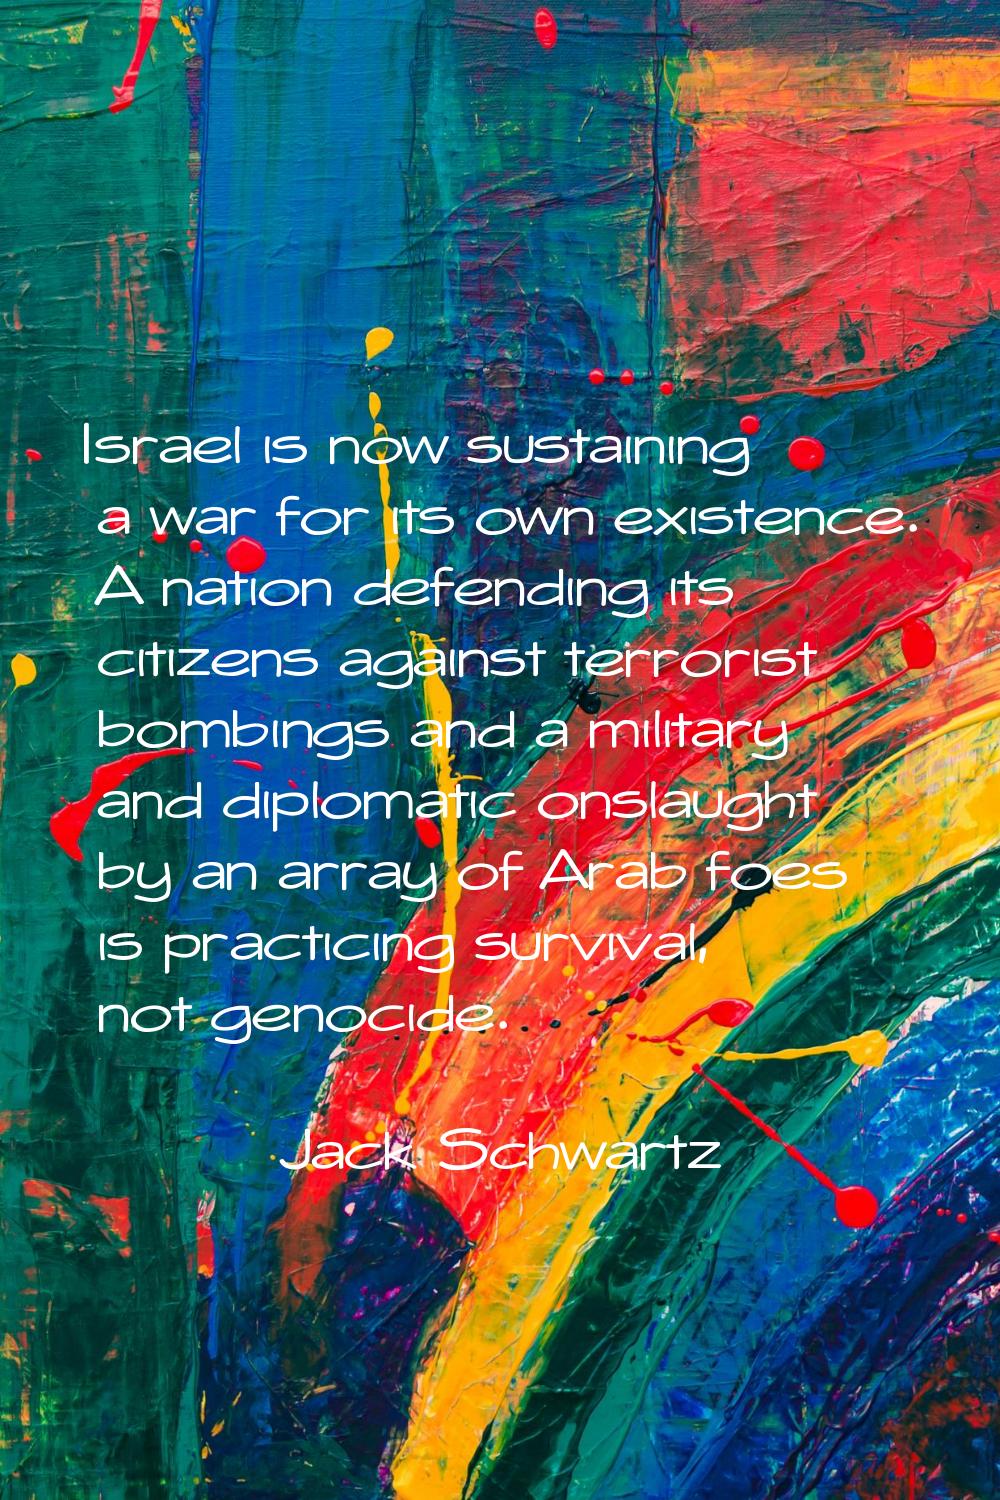 Israel is now sustaining a war for its own existence. A nation defending its citizens against terro